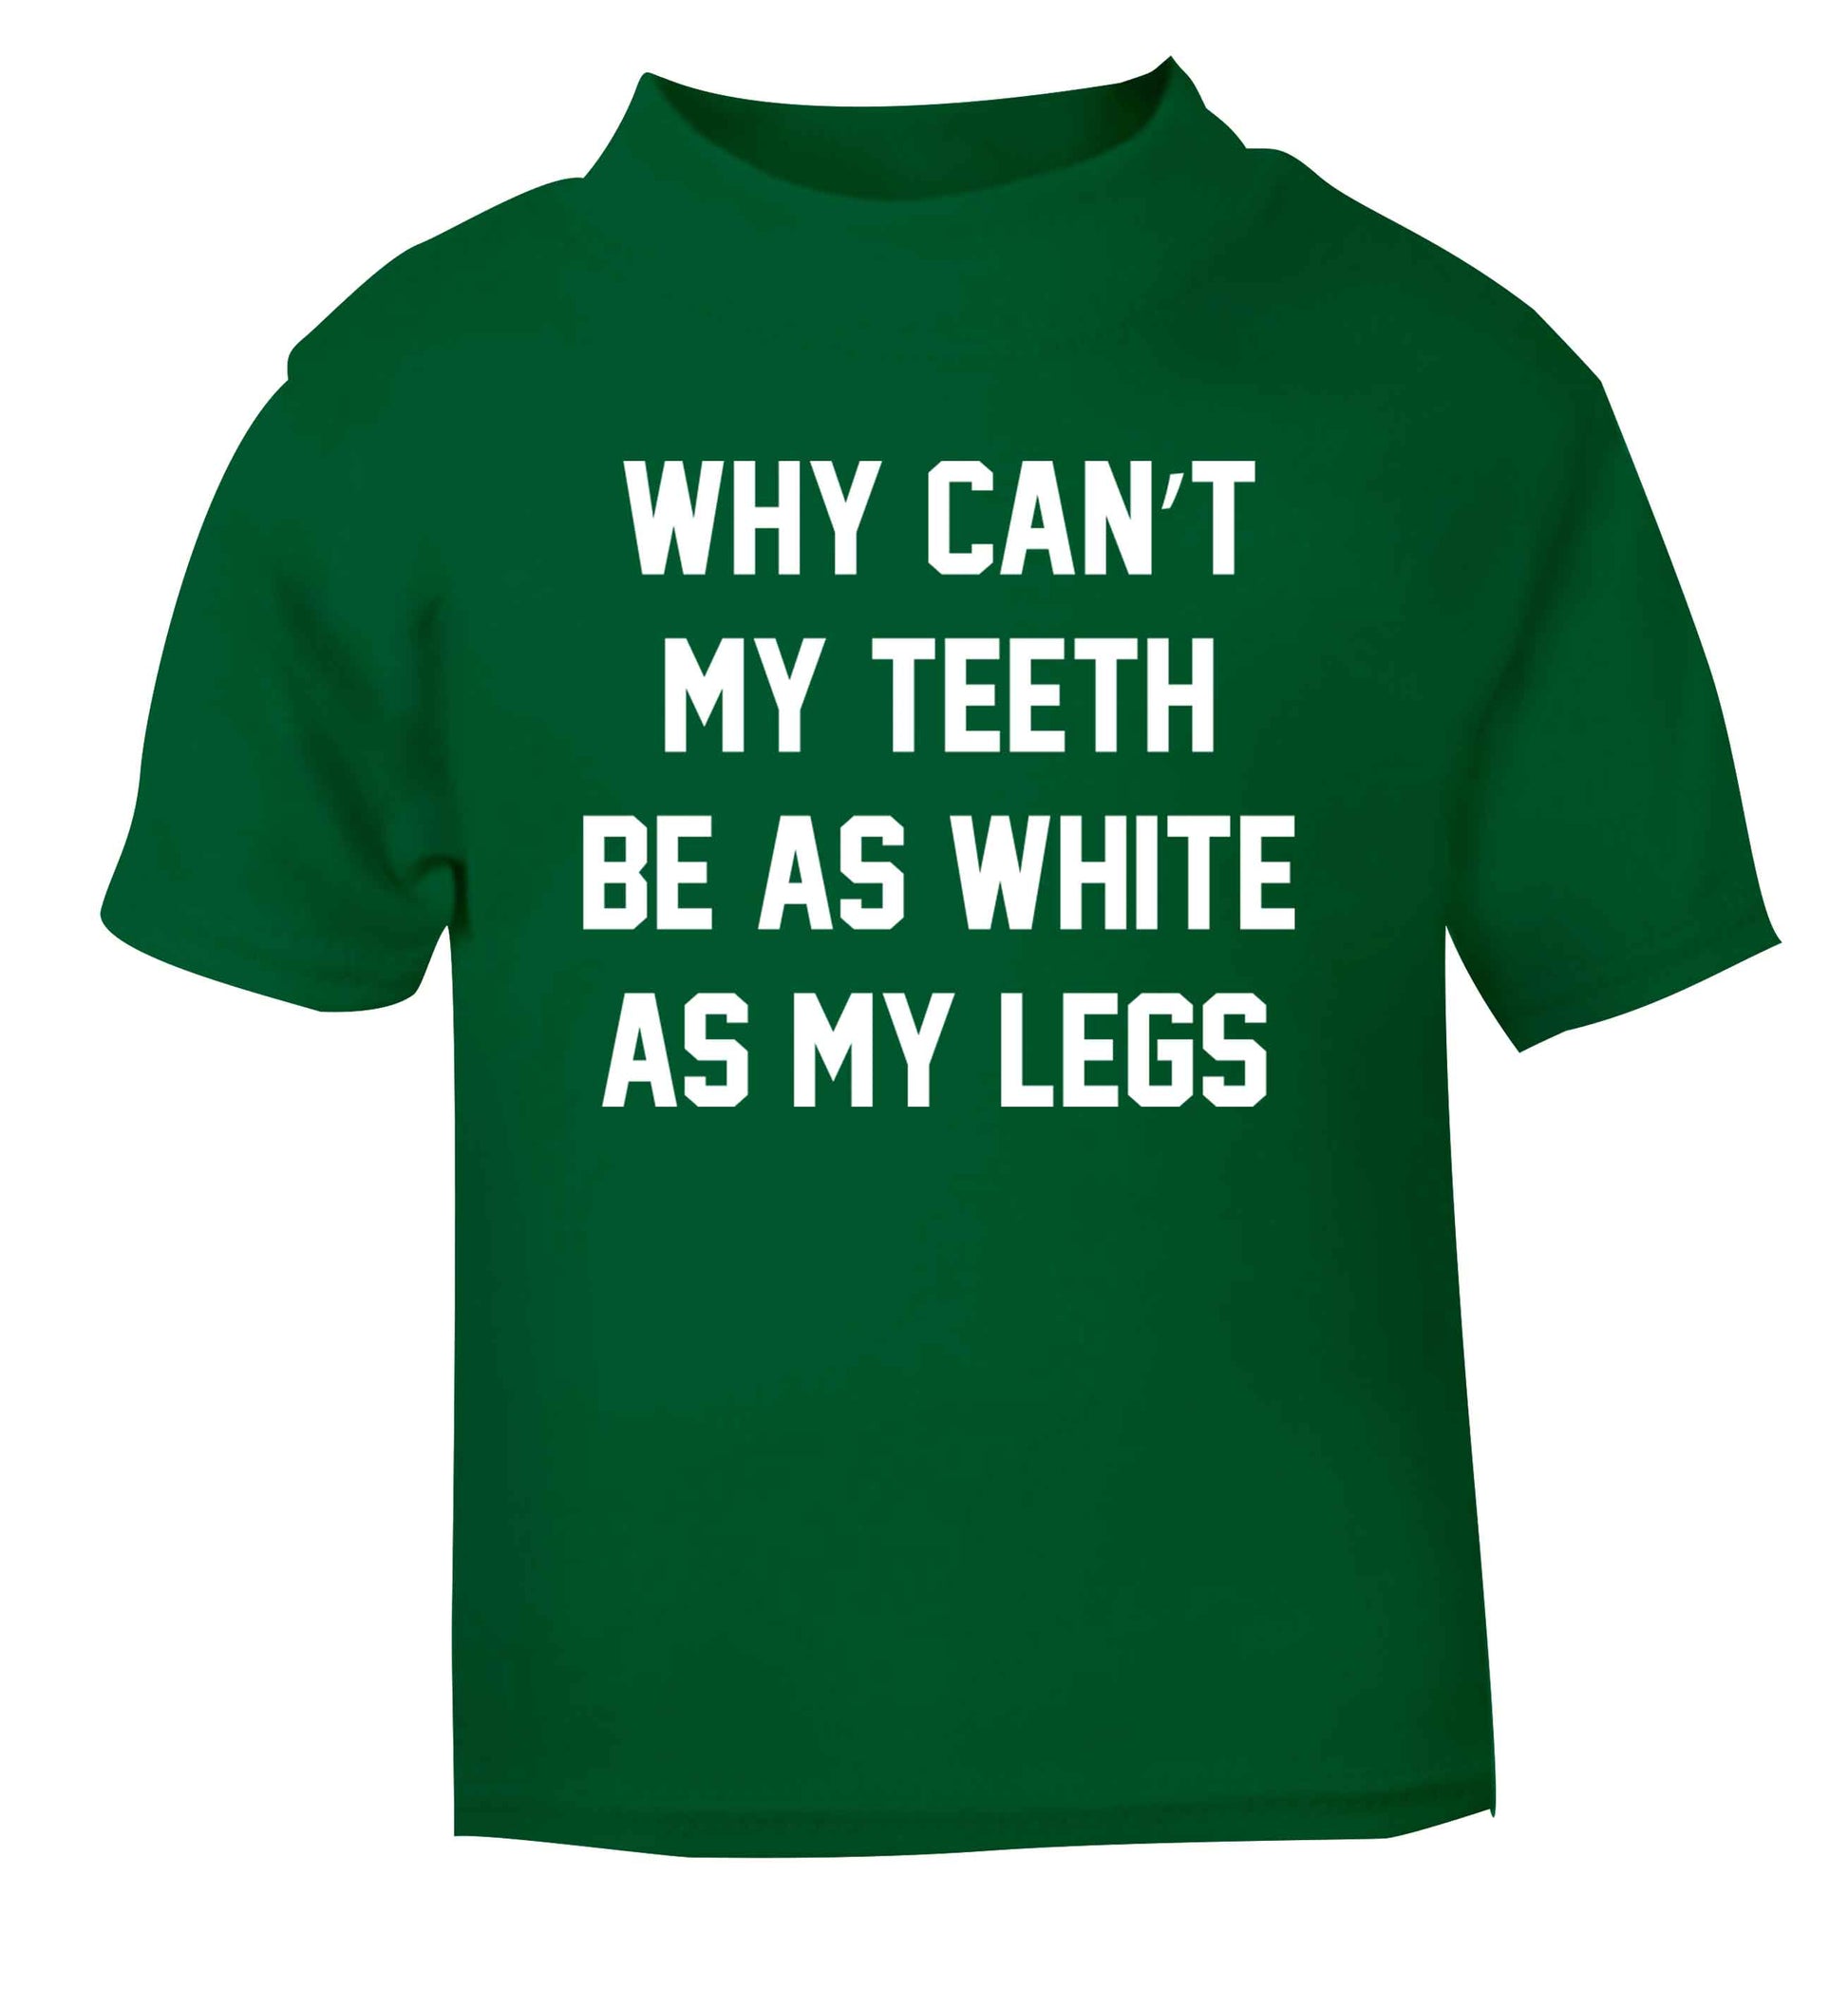 Why can't my teeth be as white as my legs green Baby Toddler Tshirt 2 Years